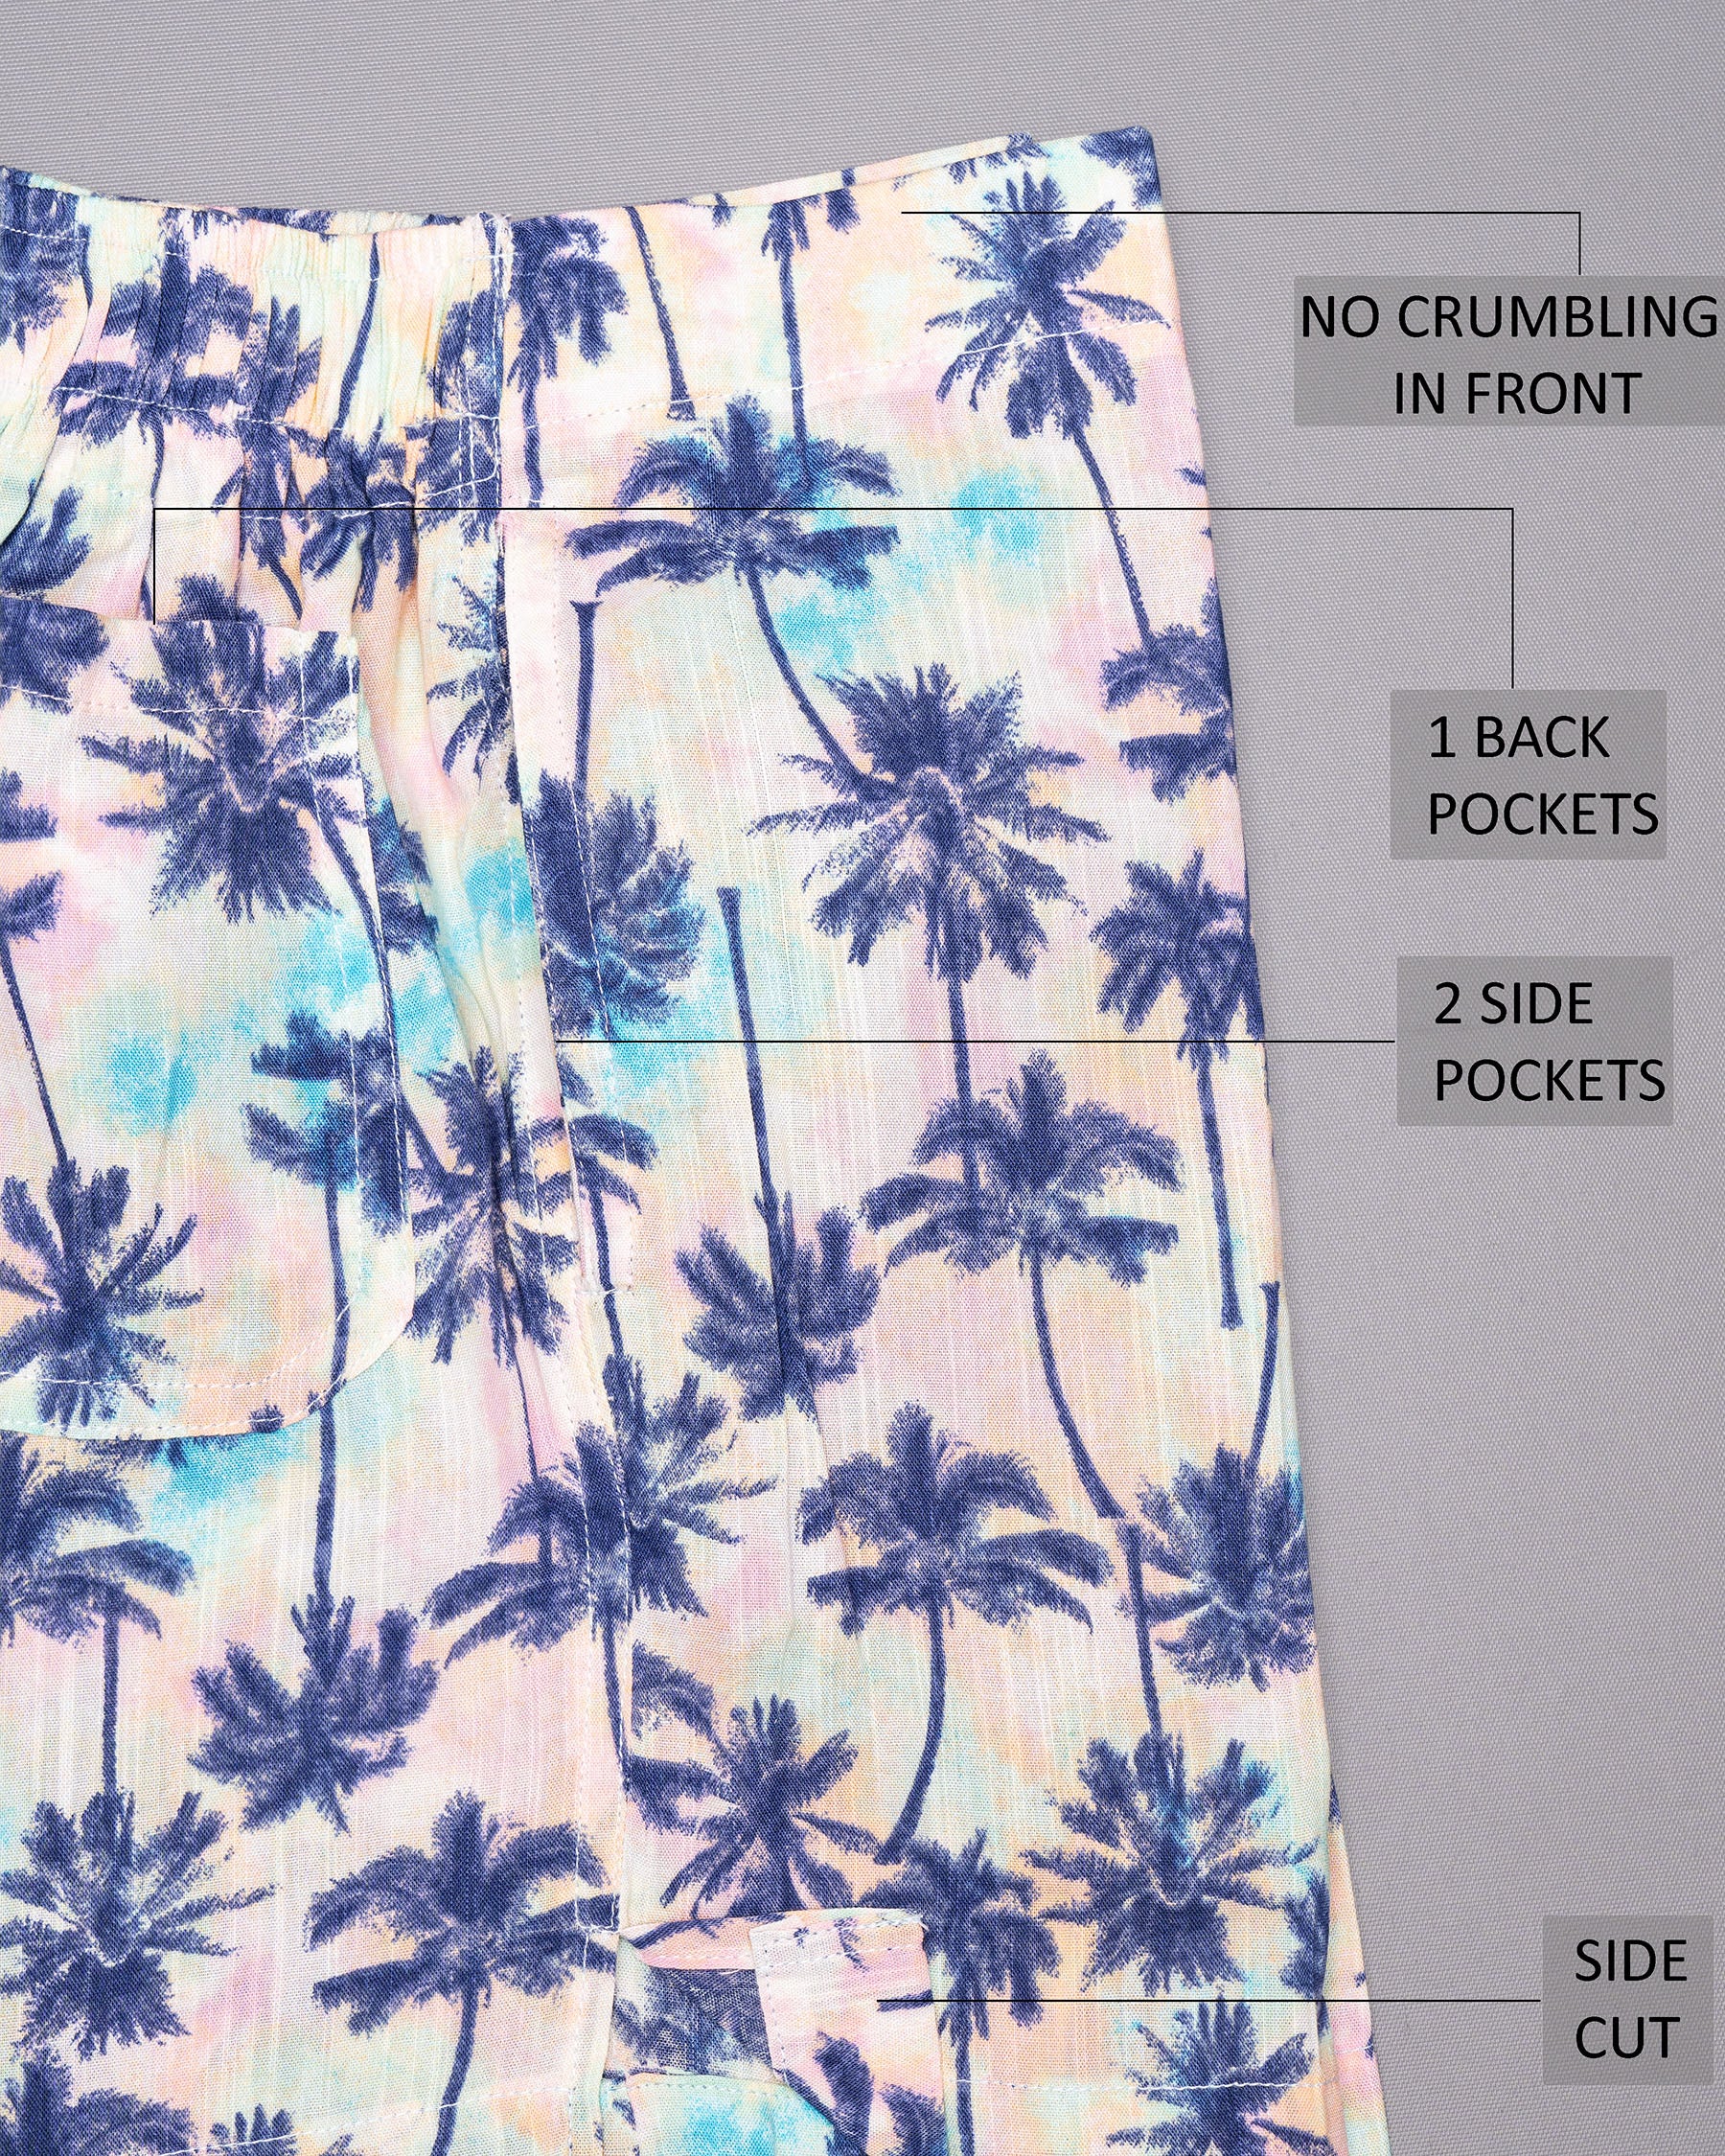 Astronaut Blue Trees Printed and White Tencel Boxers BX389-28, BX389-30, BX389-32, BX389-34, BX389-36, BX389-38, BX389-40, BX389-42, BX389-44